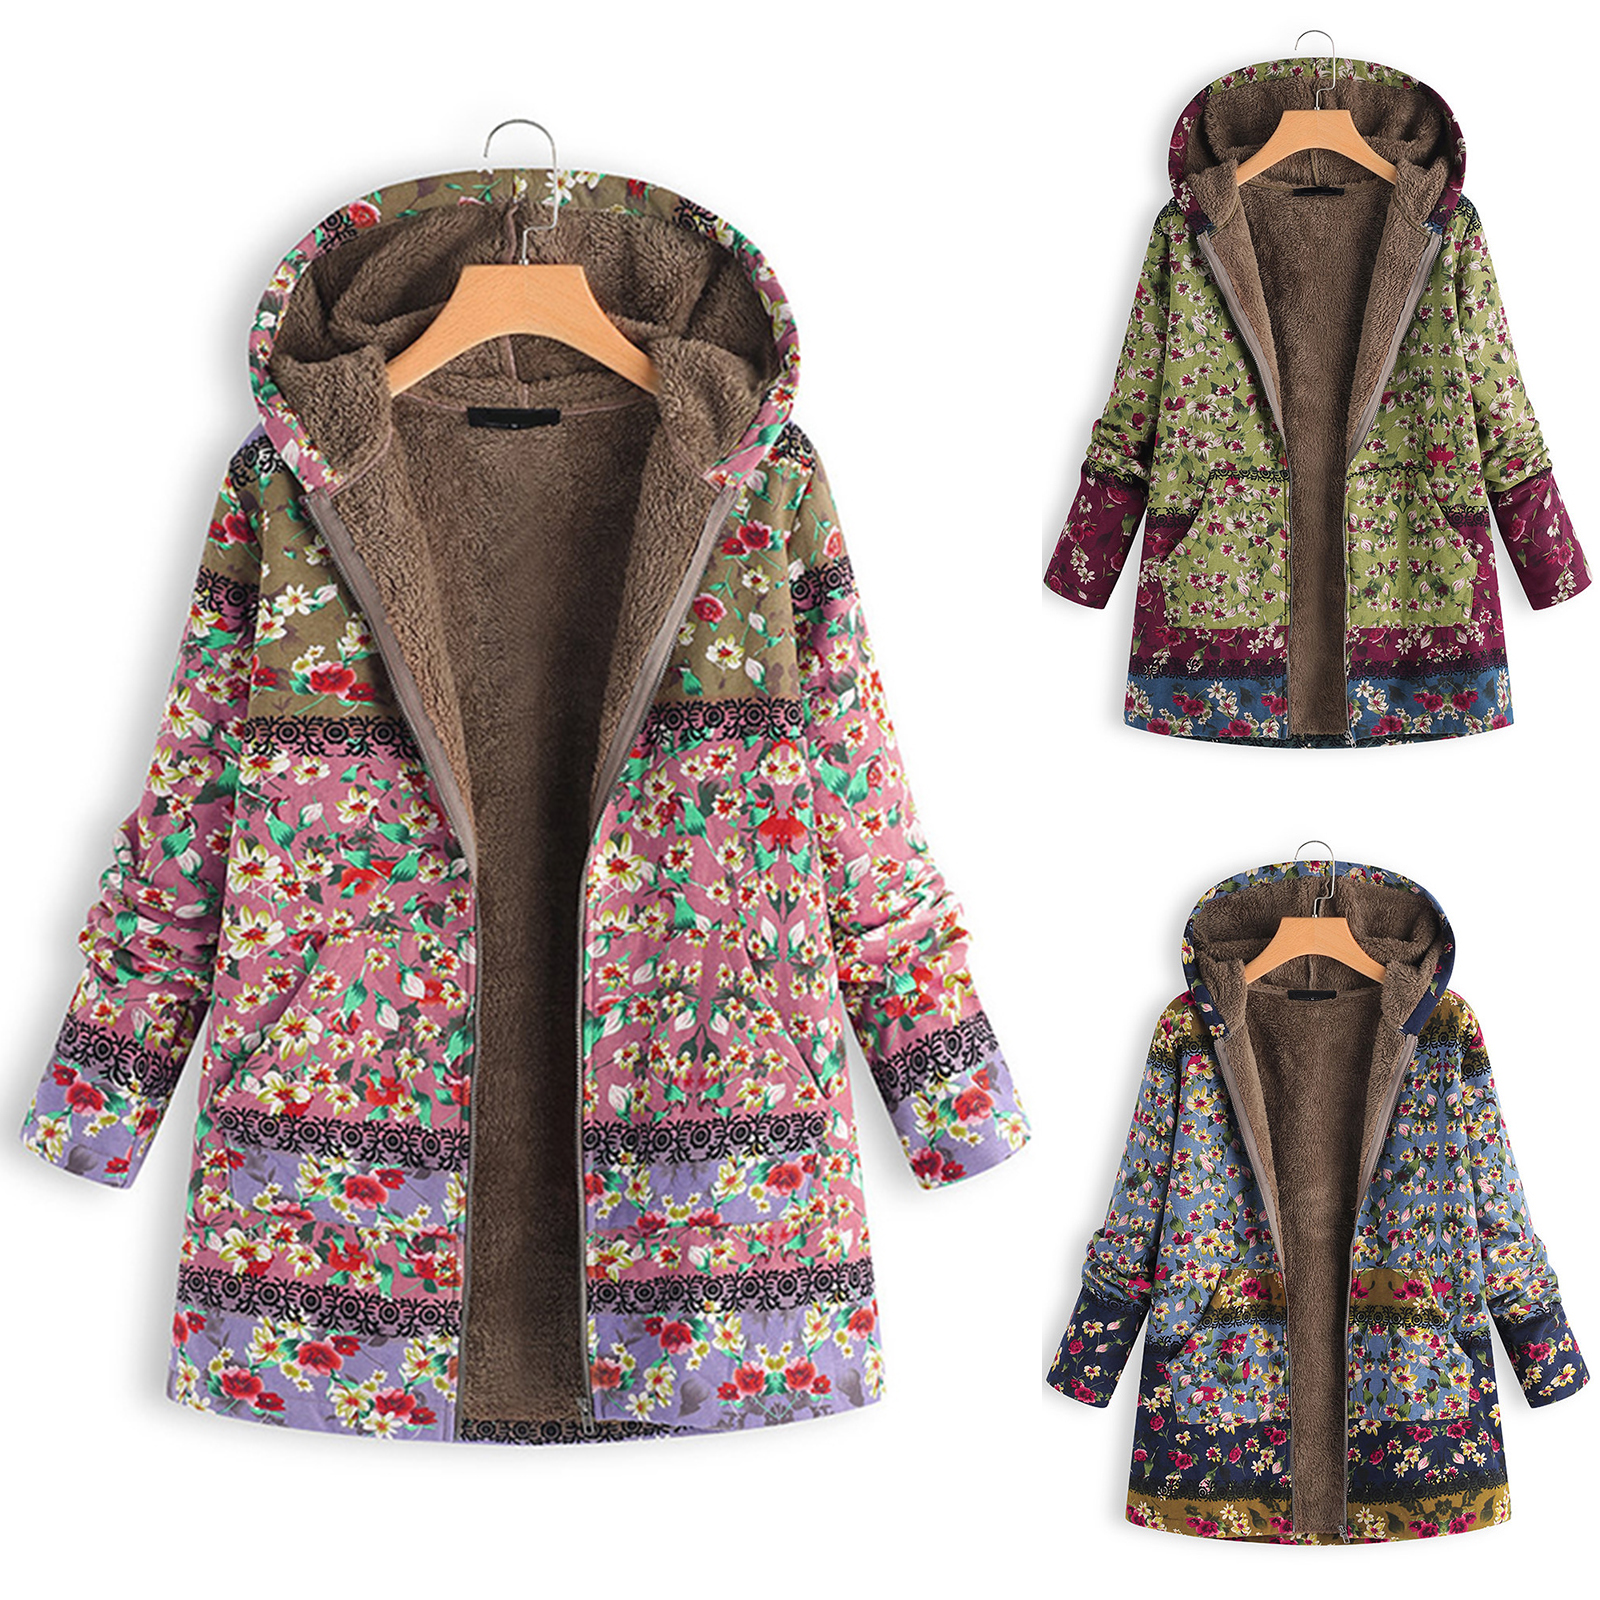 Women Winter Coat Floral Printed Hooded with Pockets Warm Fleece Button Coat Long Sleeve Jacket - image 3 of 8